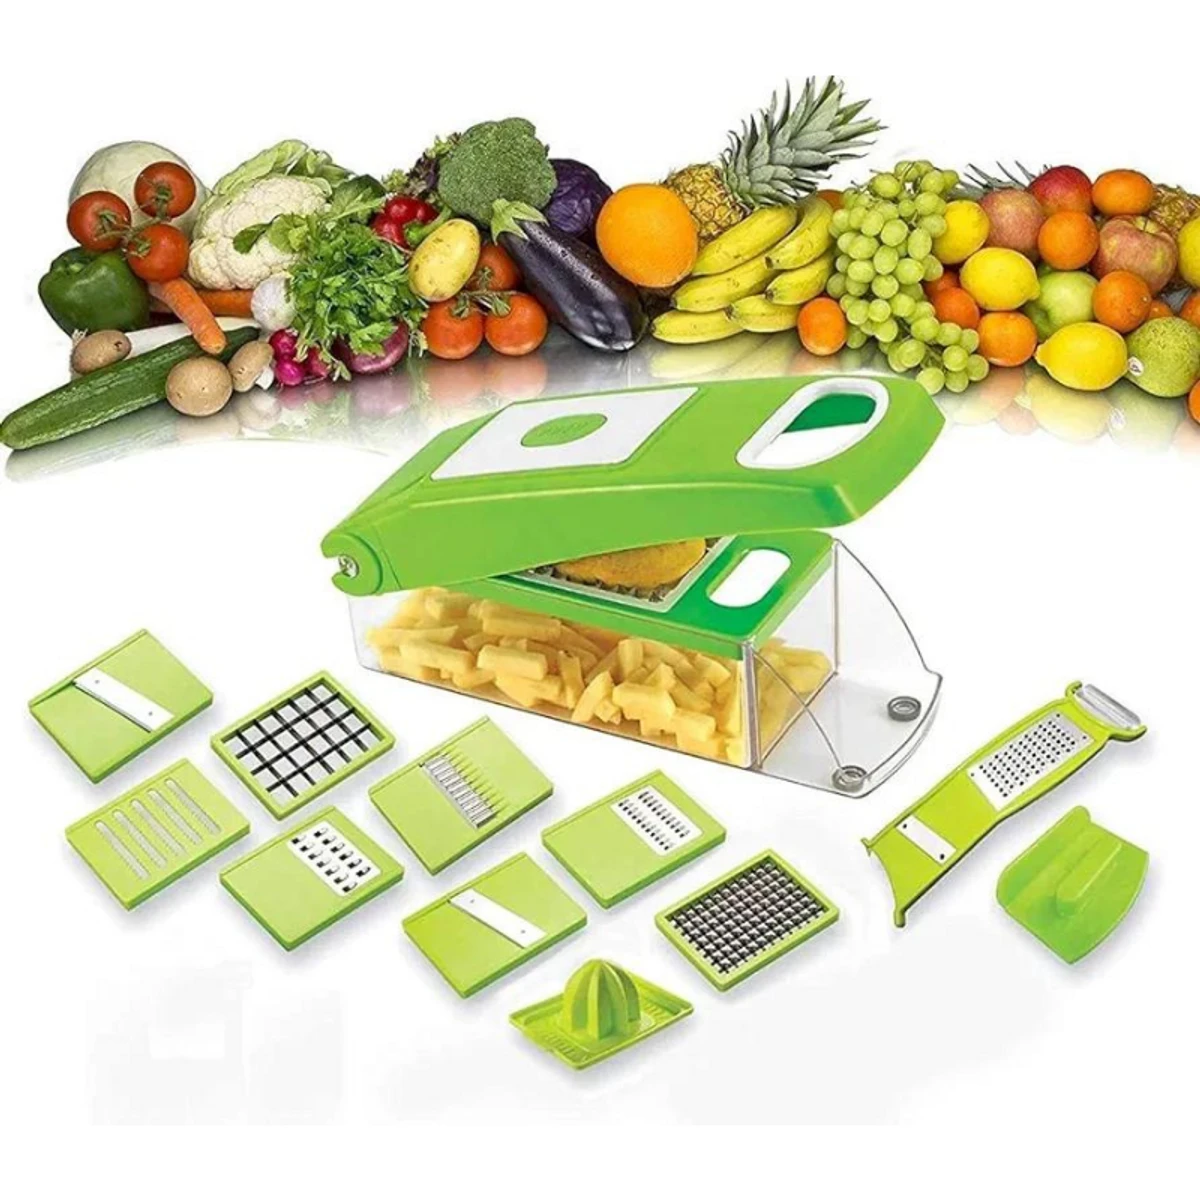 Discovery fruits and vegetable chopper